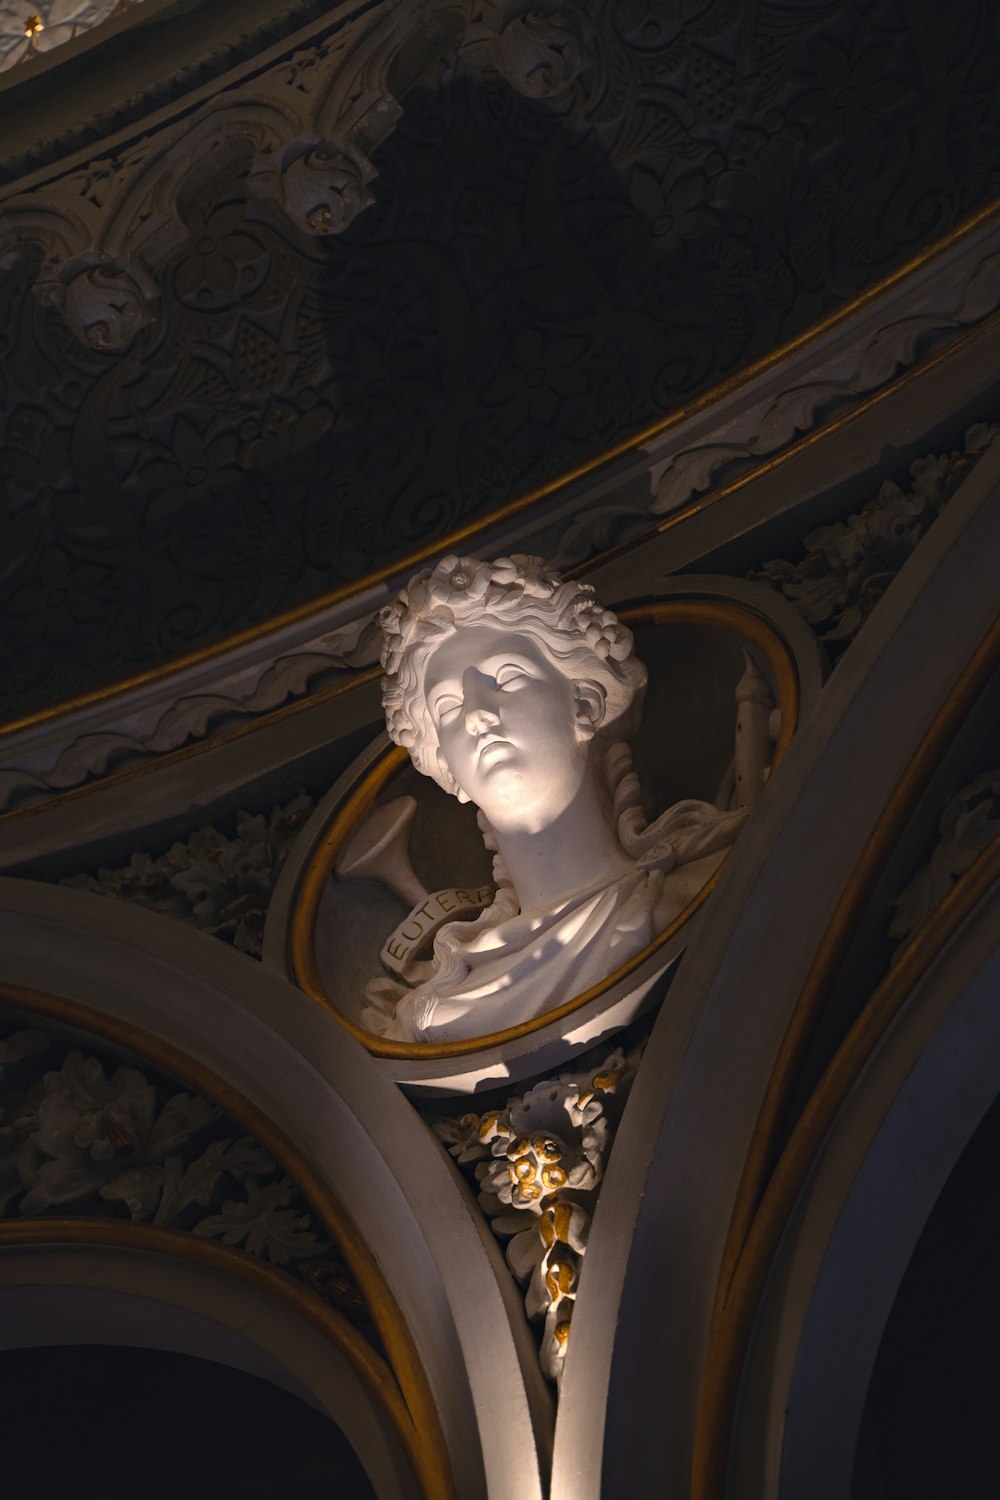 a statue of a woman on the ceiling of a building